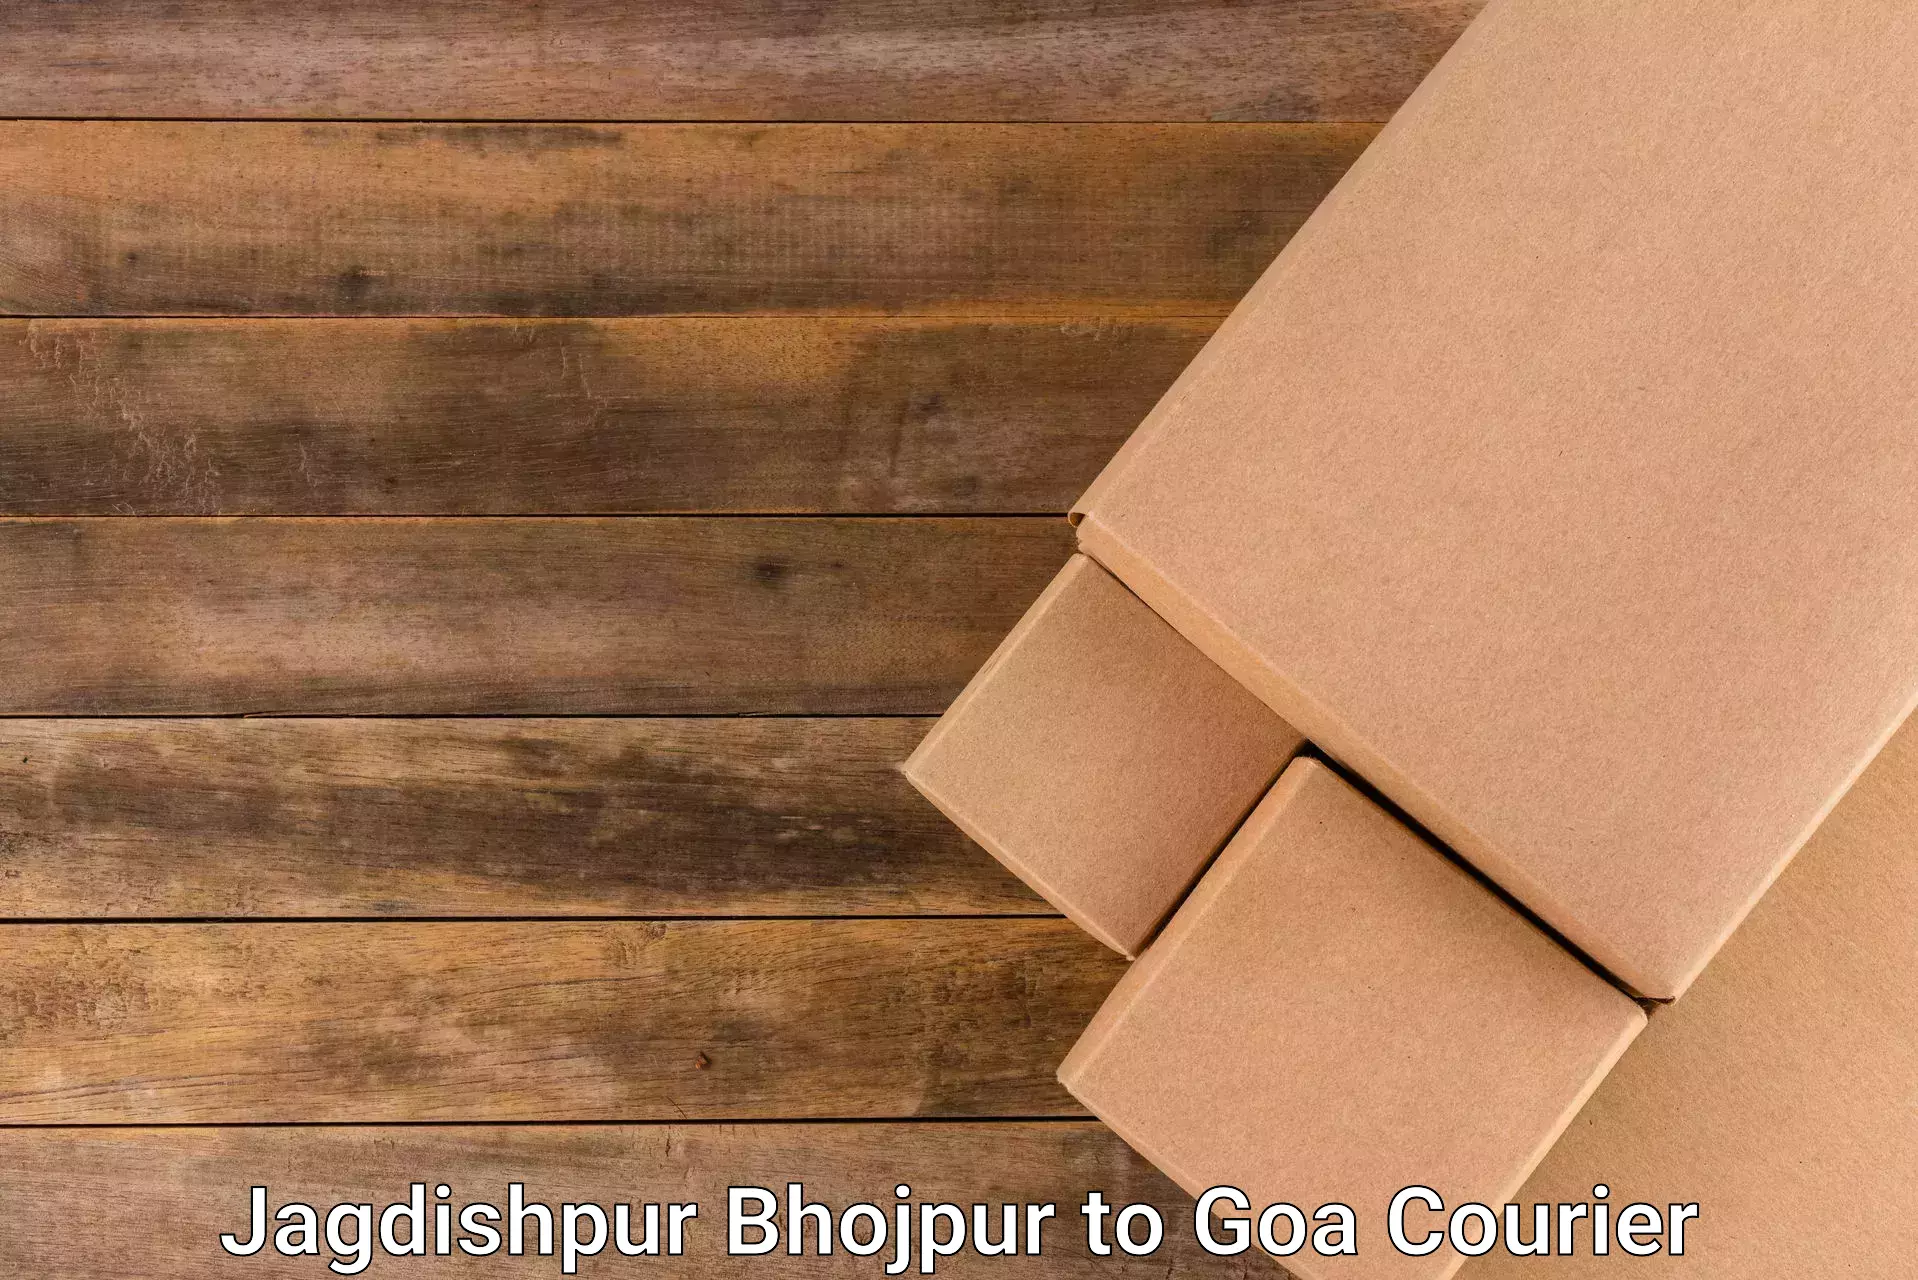 Parcel delivery automation Jagdishpur Bhojpur to Goa